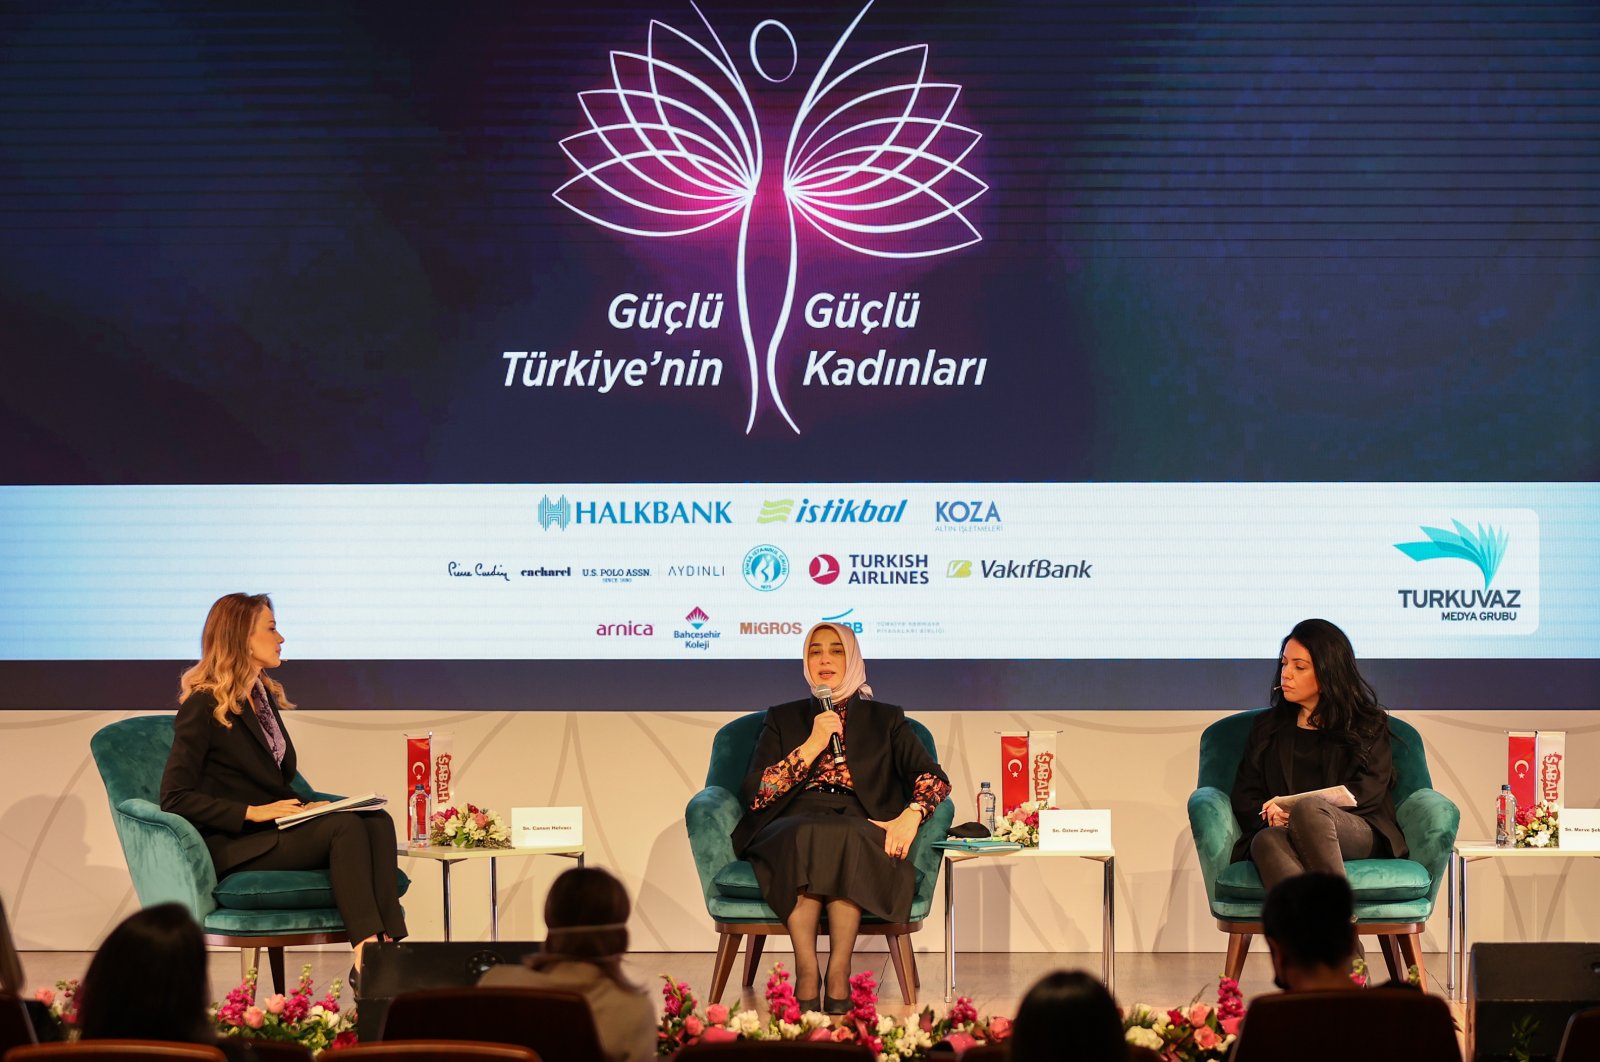 AK Party parliamentary group deputy chair Özlem Zengin (C) speaks at a panel during the summit, in Istanbul, Turkey, Mar. 4, 2021. (AA PHOTO) 